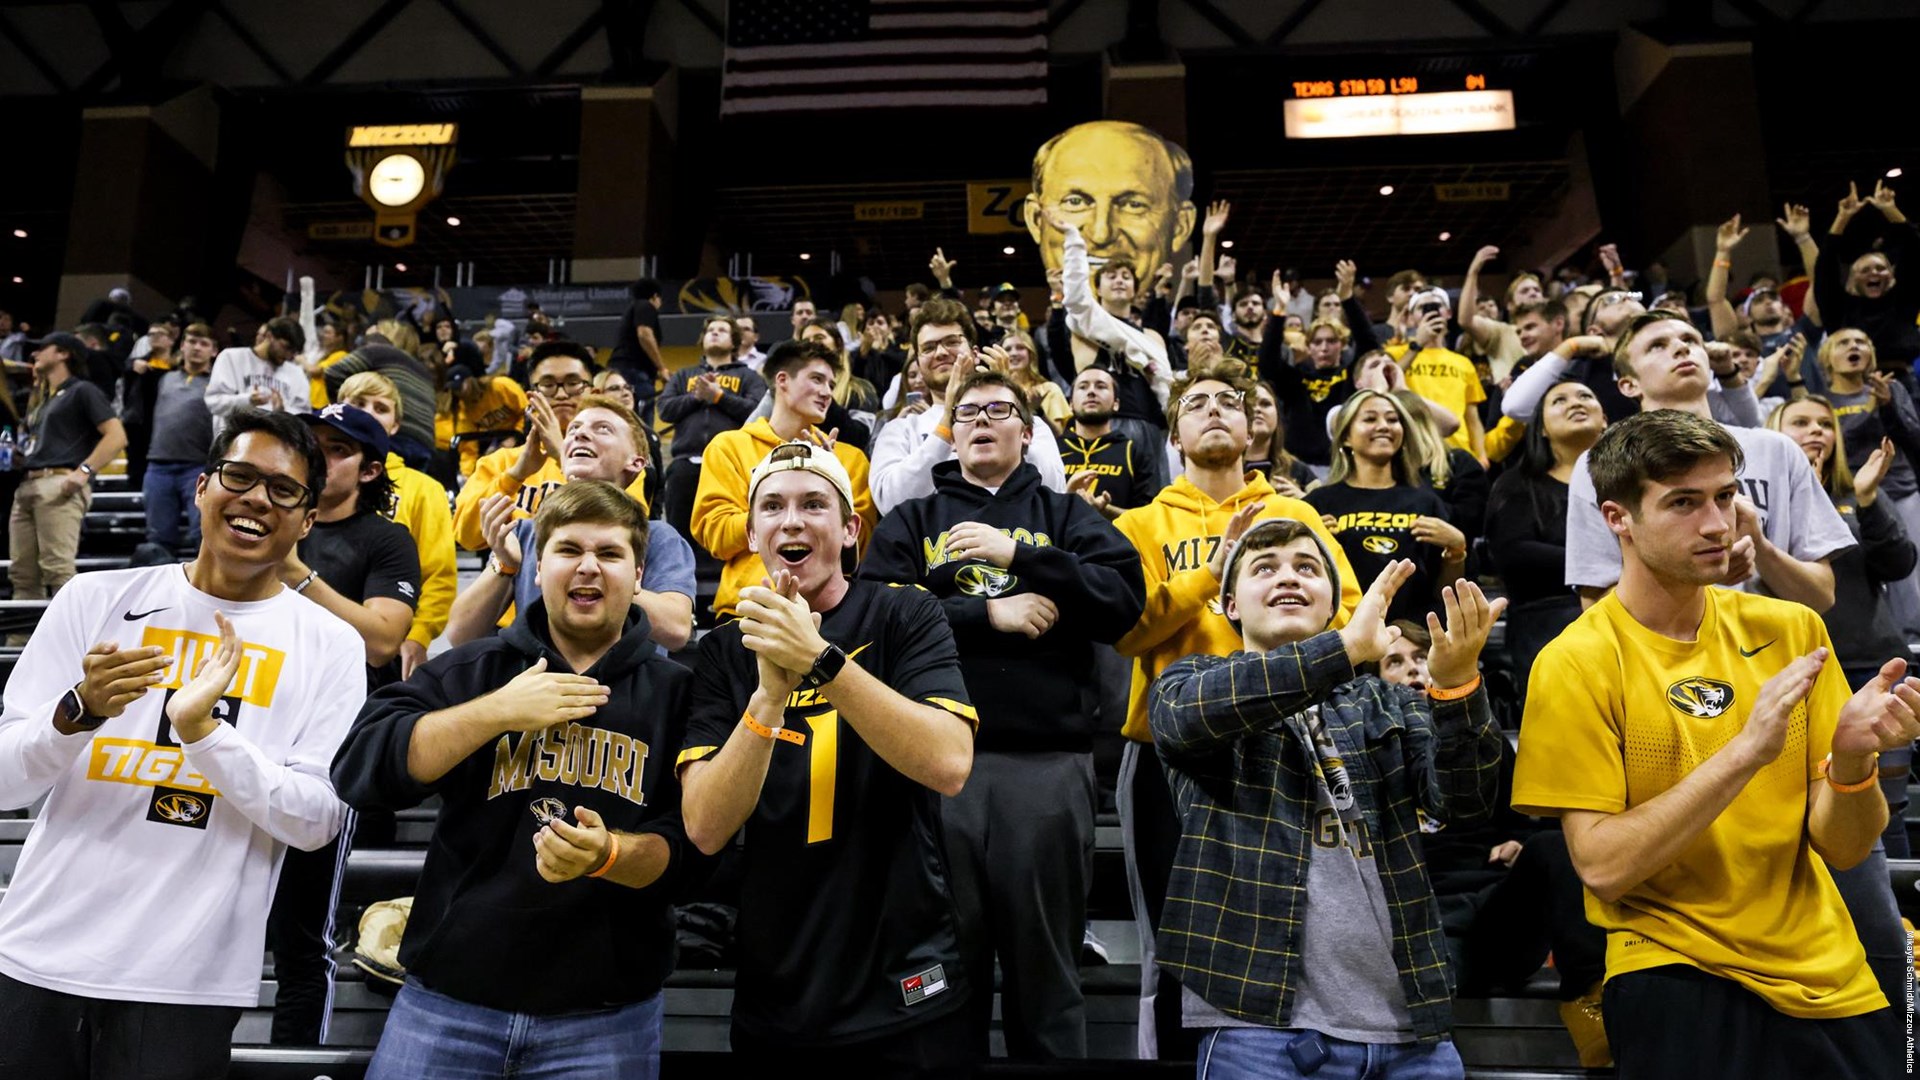 student section crowd in Mizzou Arena